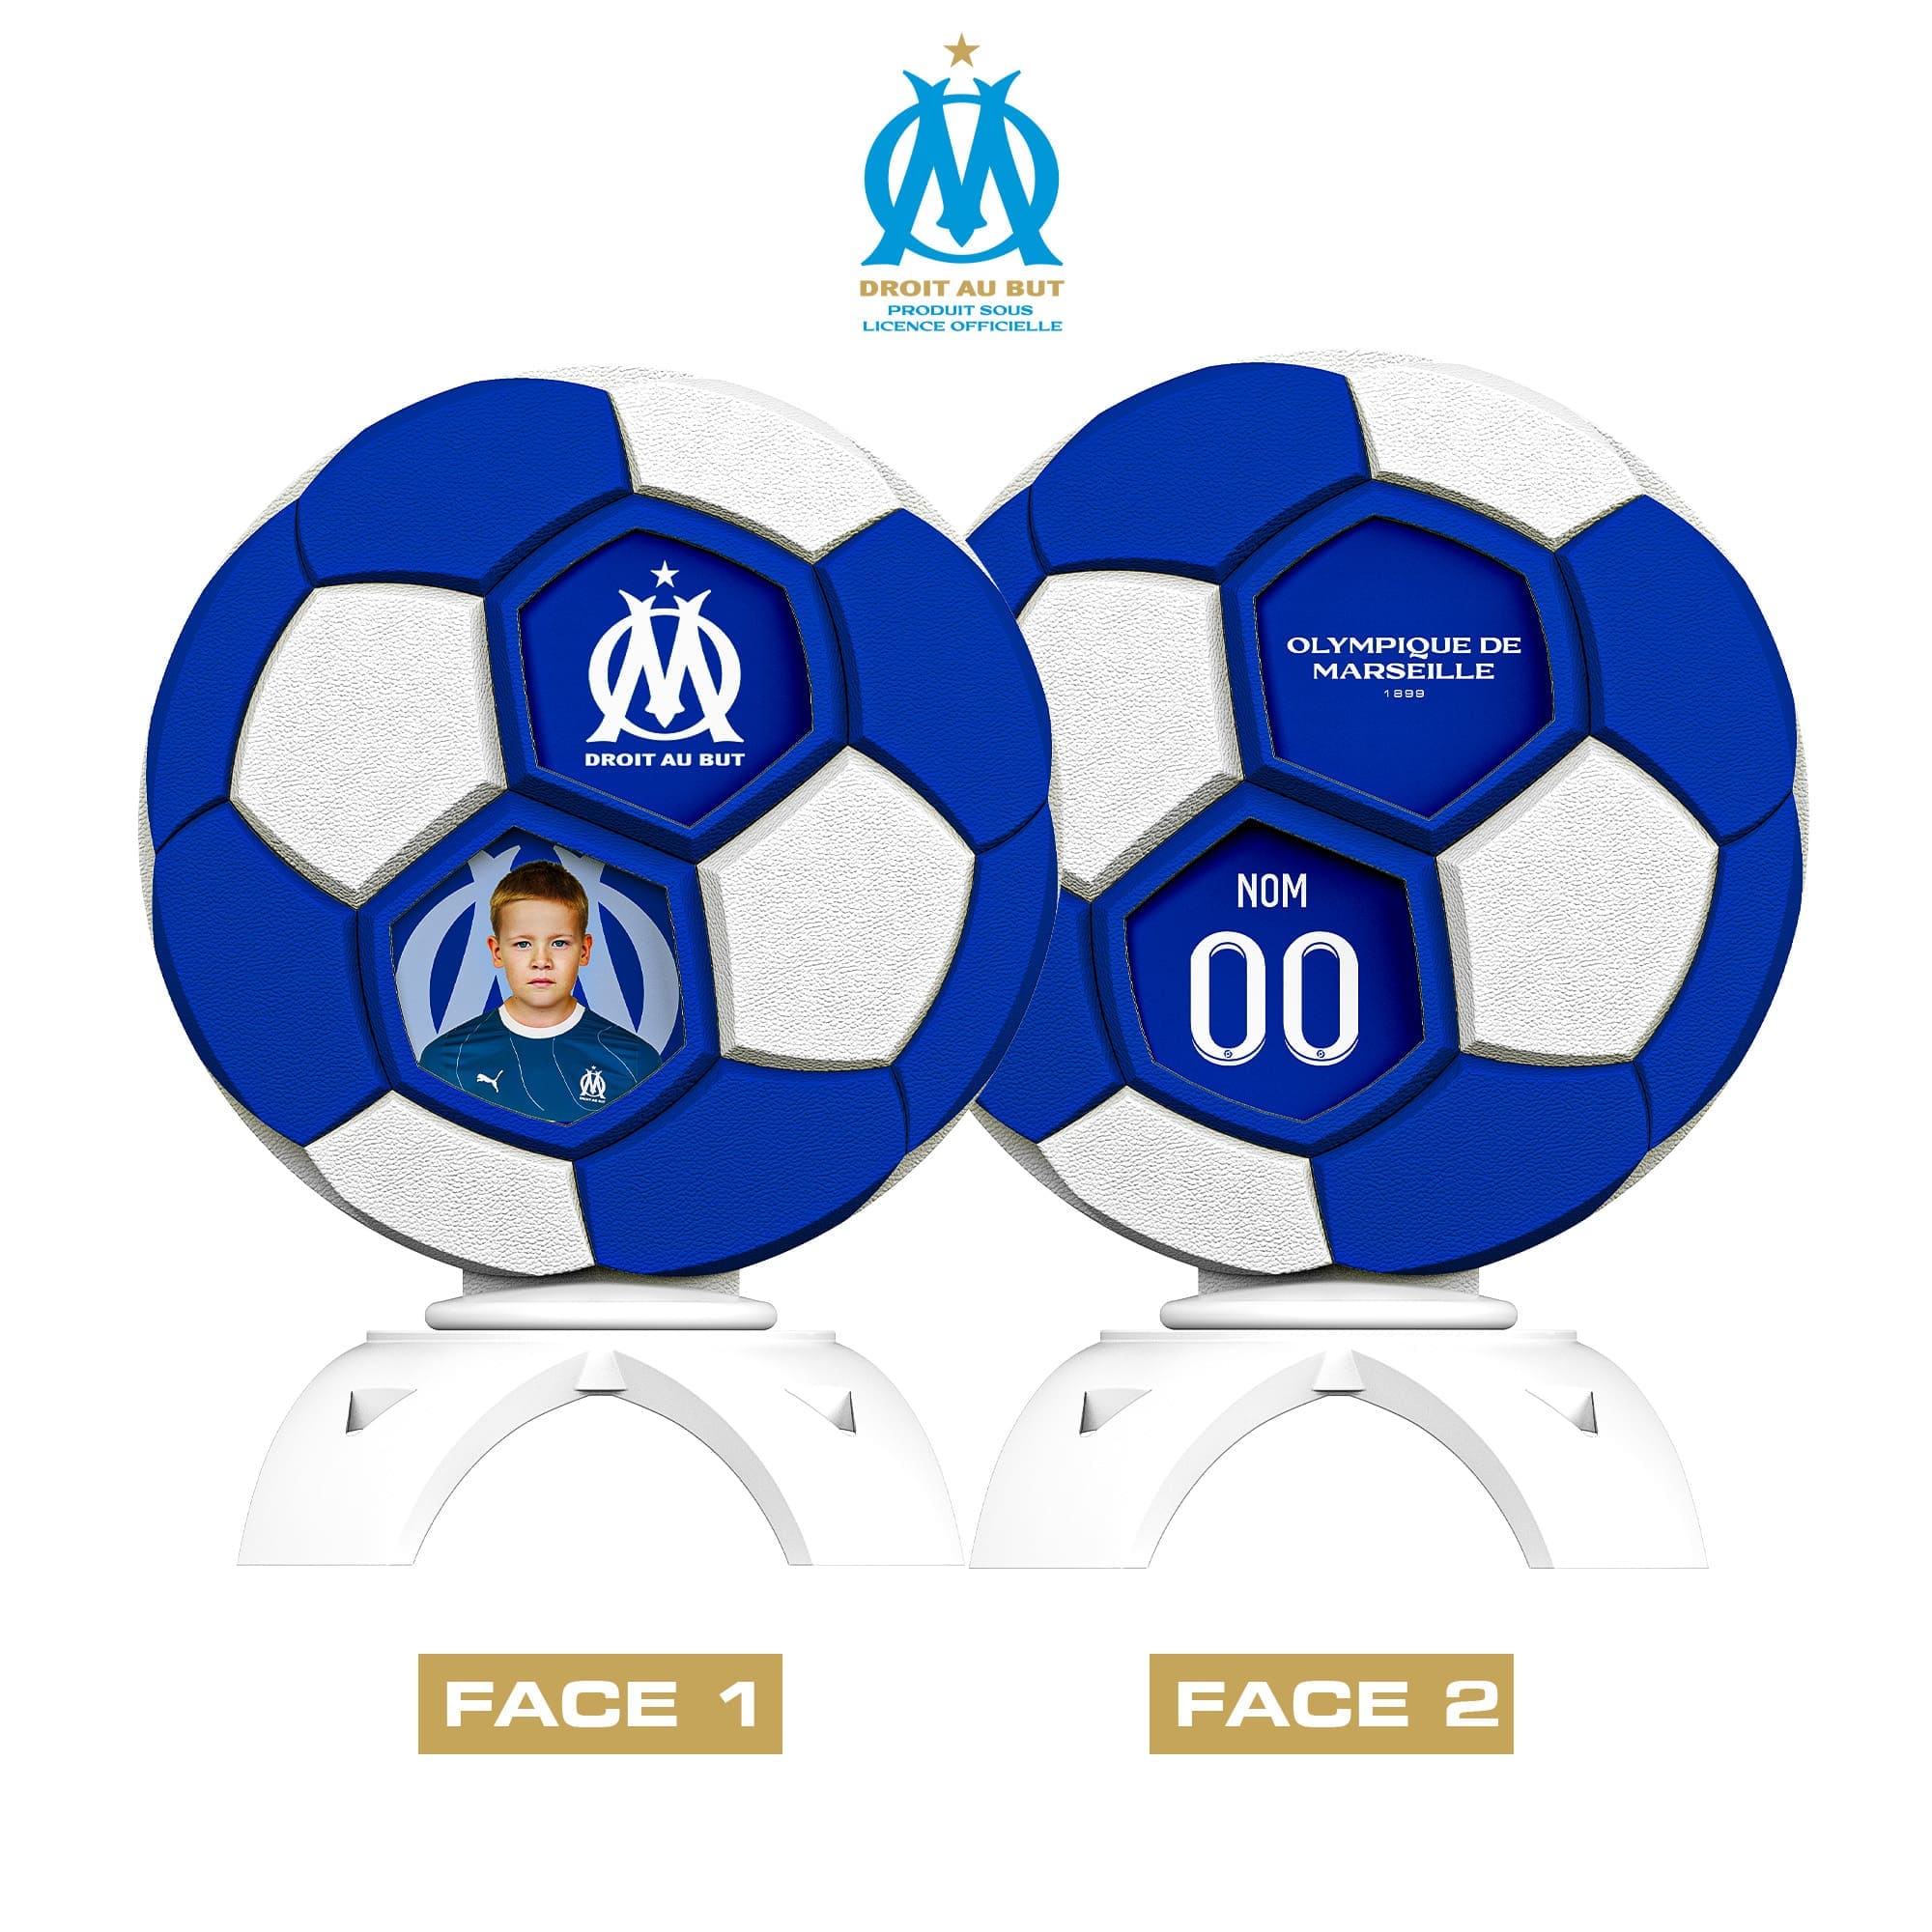 Create your officially licensed Olympique de Marseille trophy 